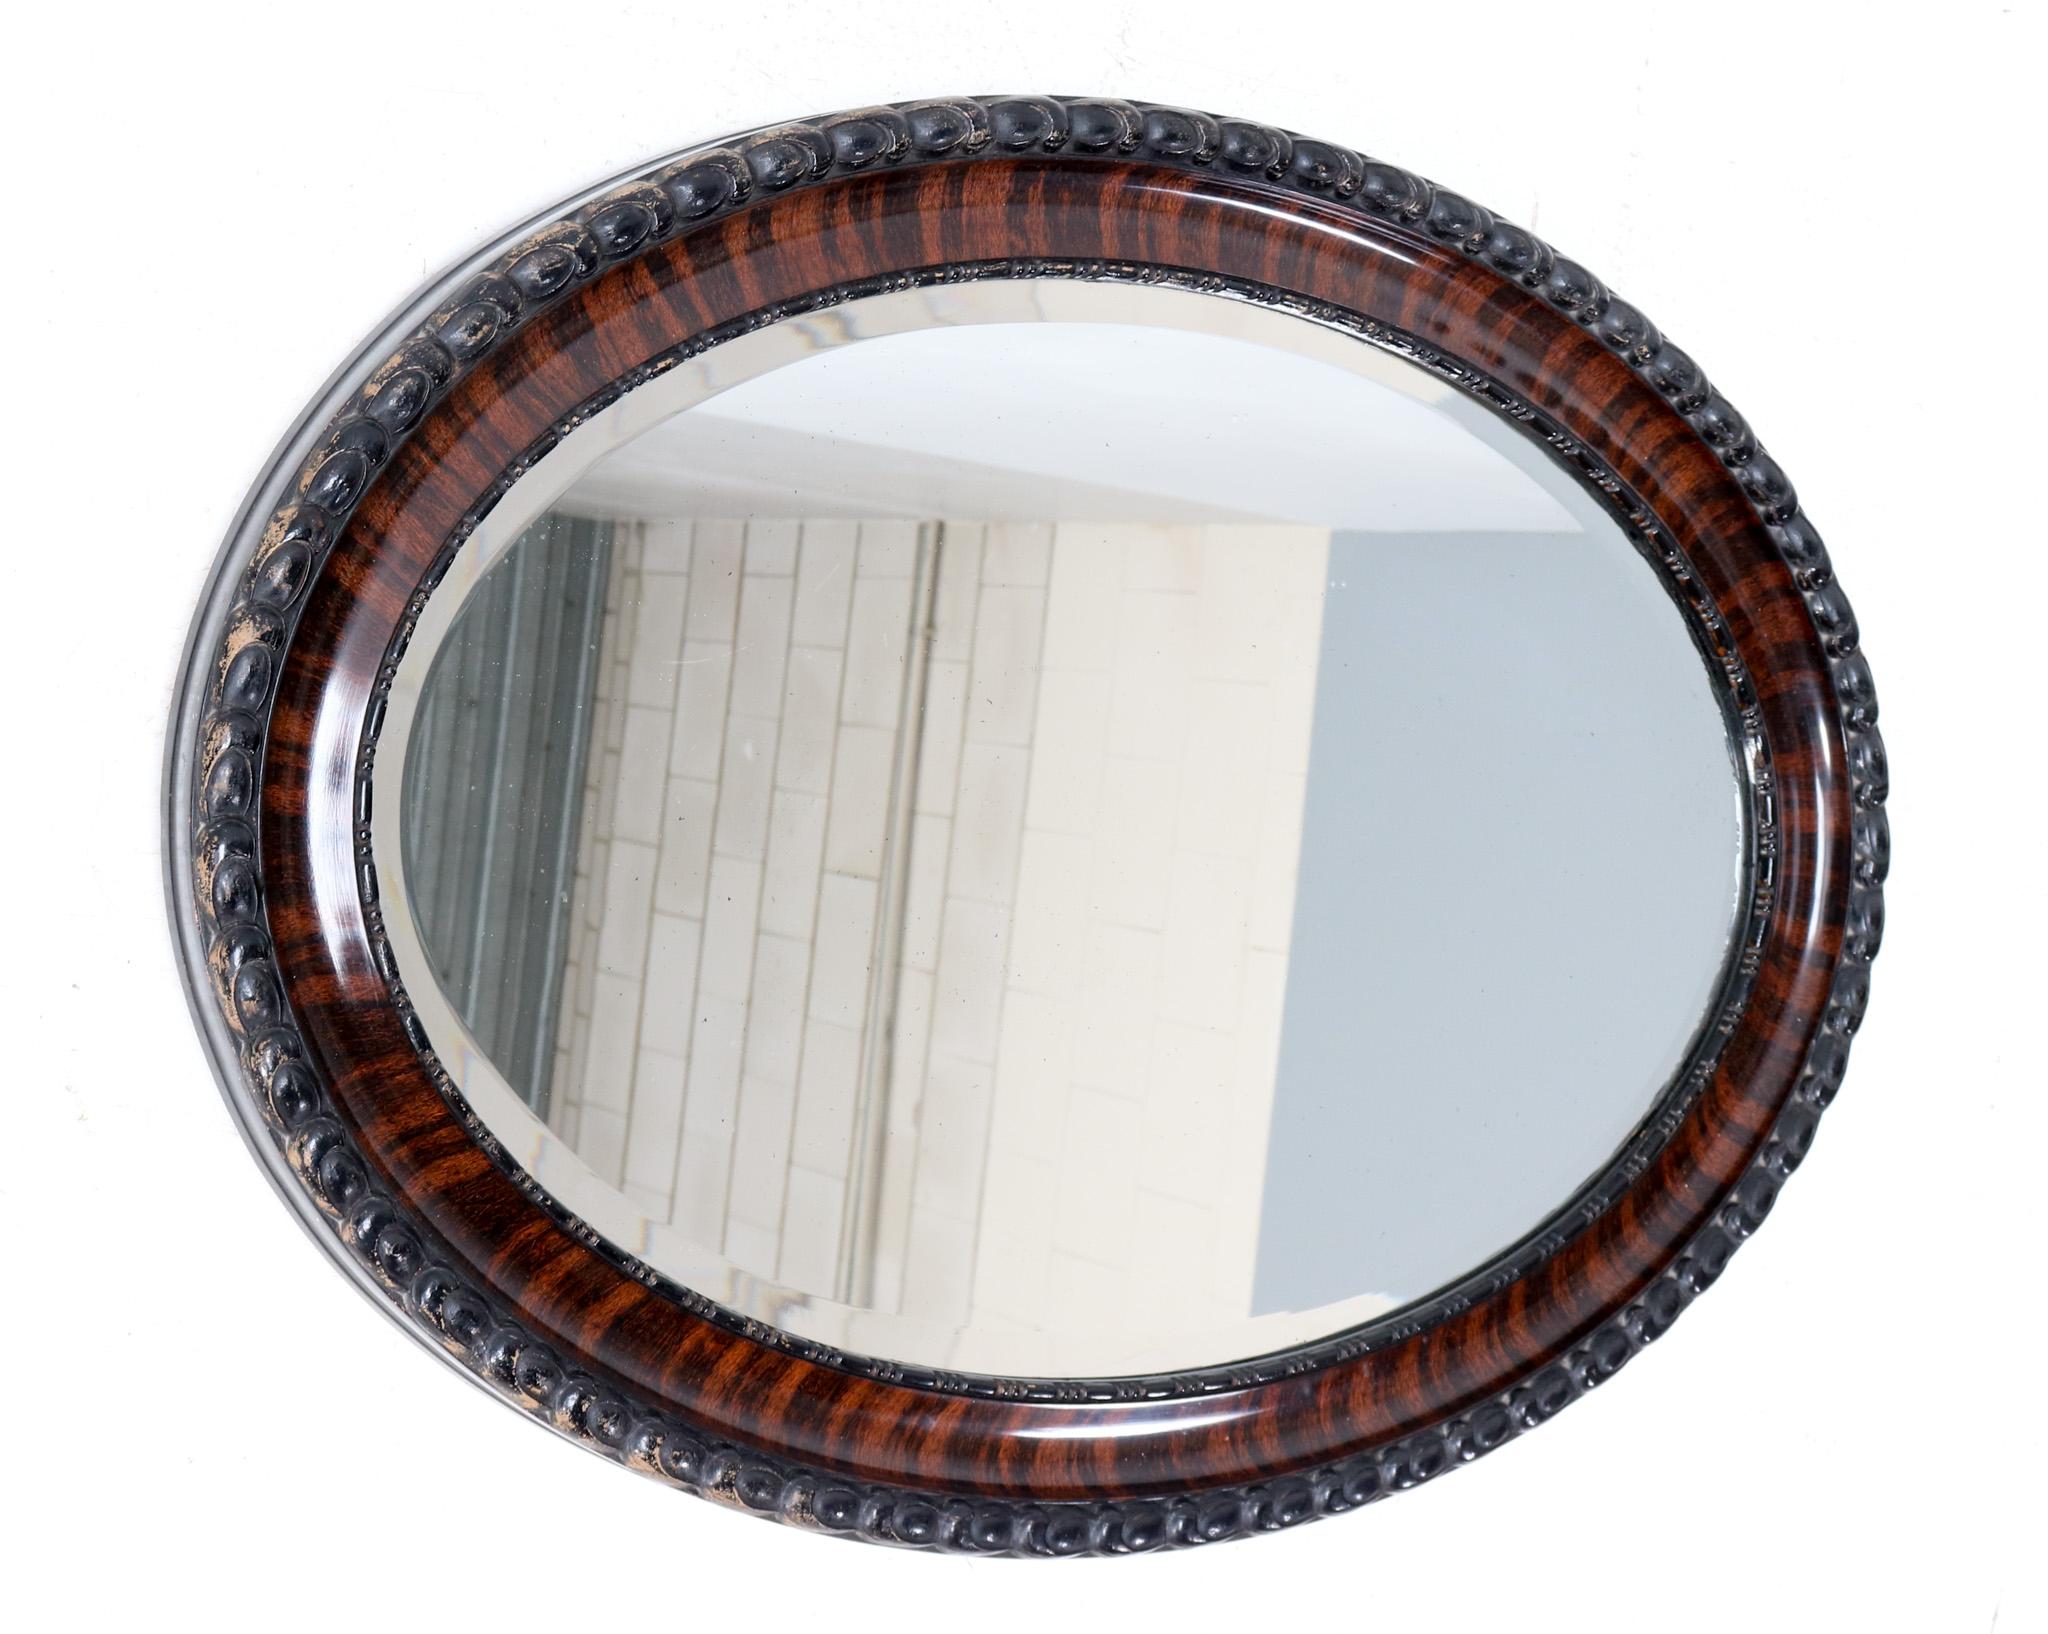 Stunning and rare Victorian wall mirror.
Striking Dutch design from the 1890s.
Patinated plaster and wooden frame with the original beveled mirror.
This wonderful Victorian wall mirror is in very good original condition with minor wear consistent